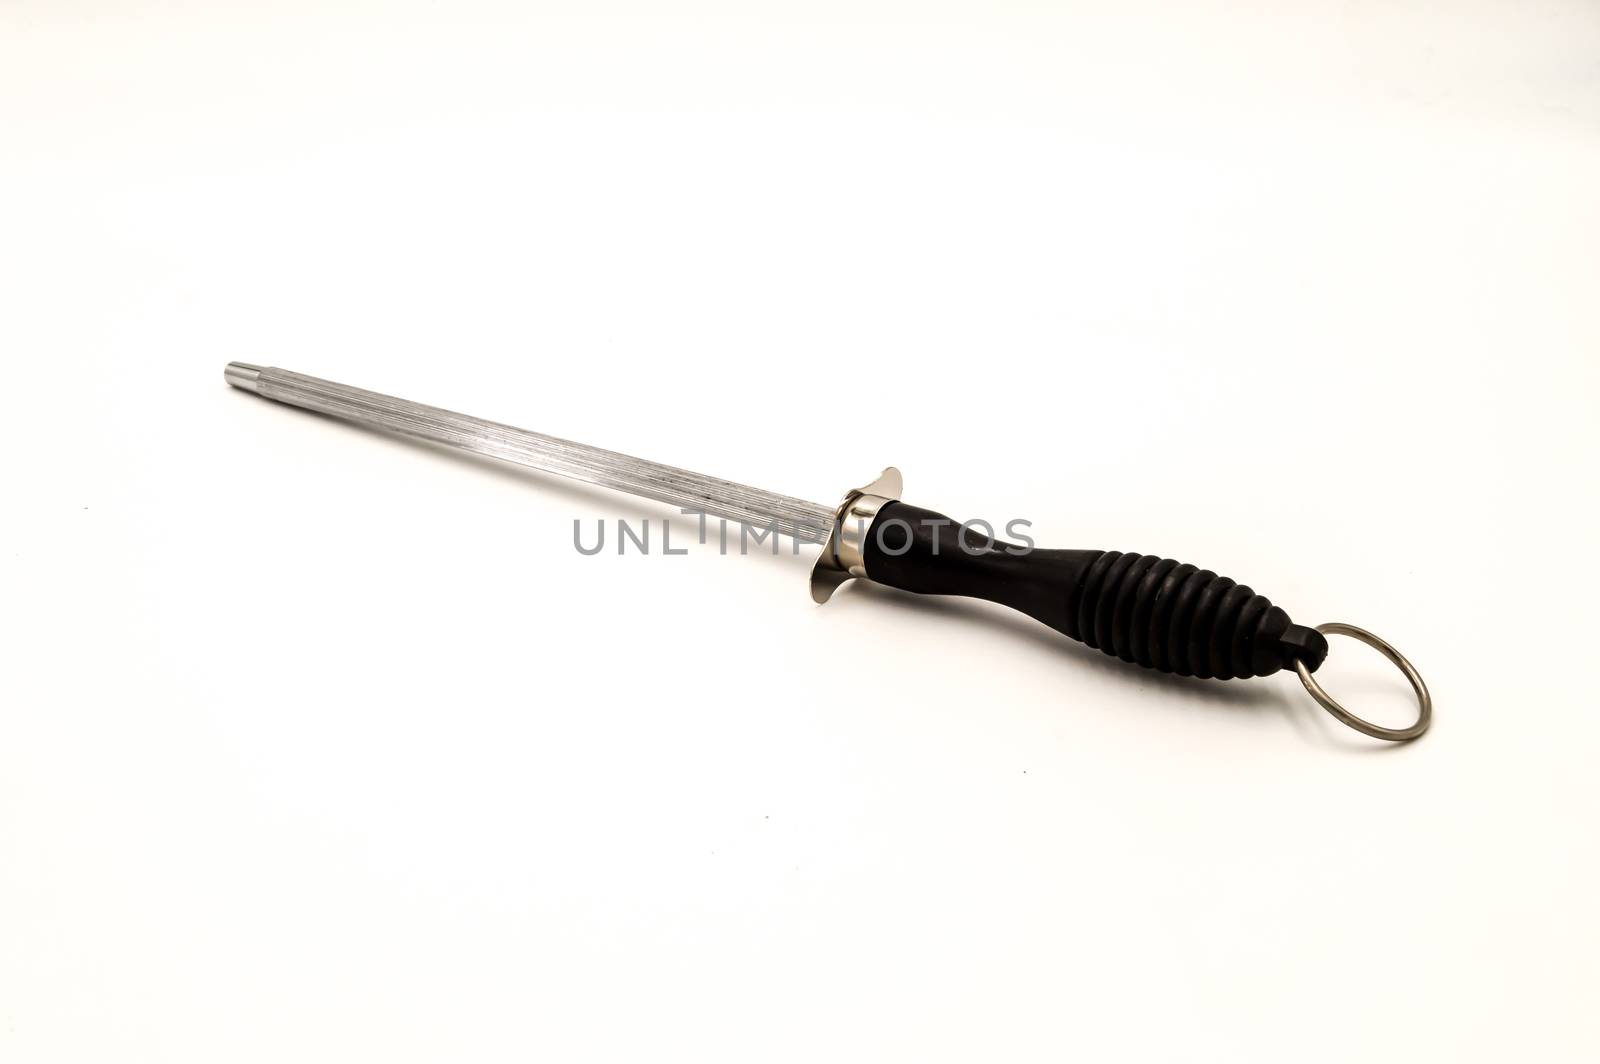 Sharpening steel with black handle on a white background